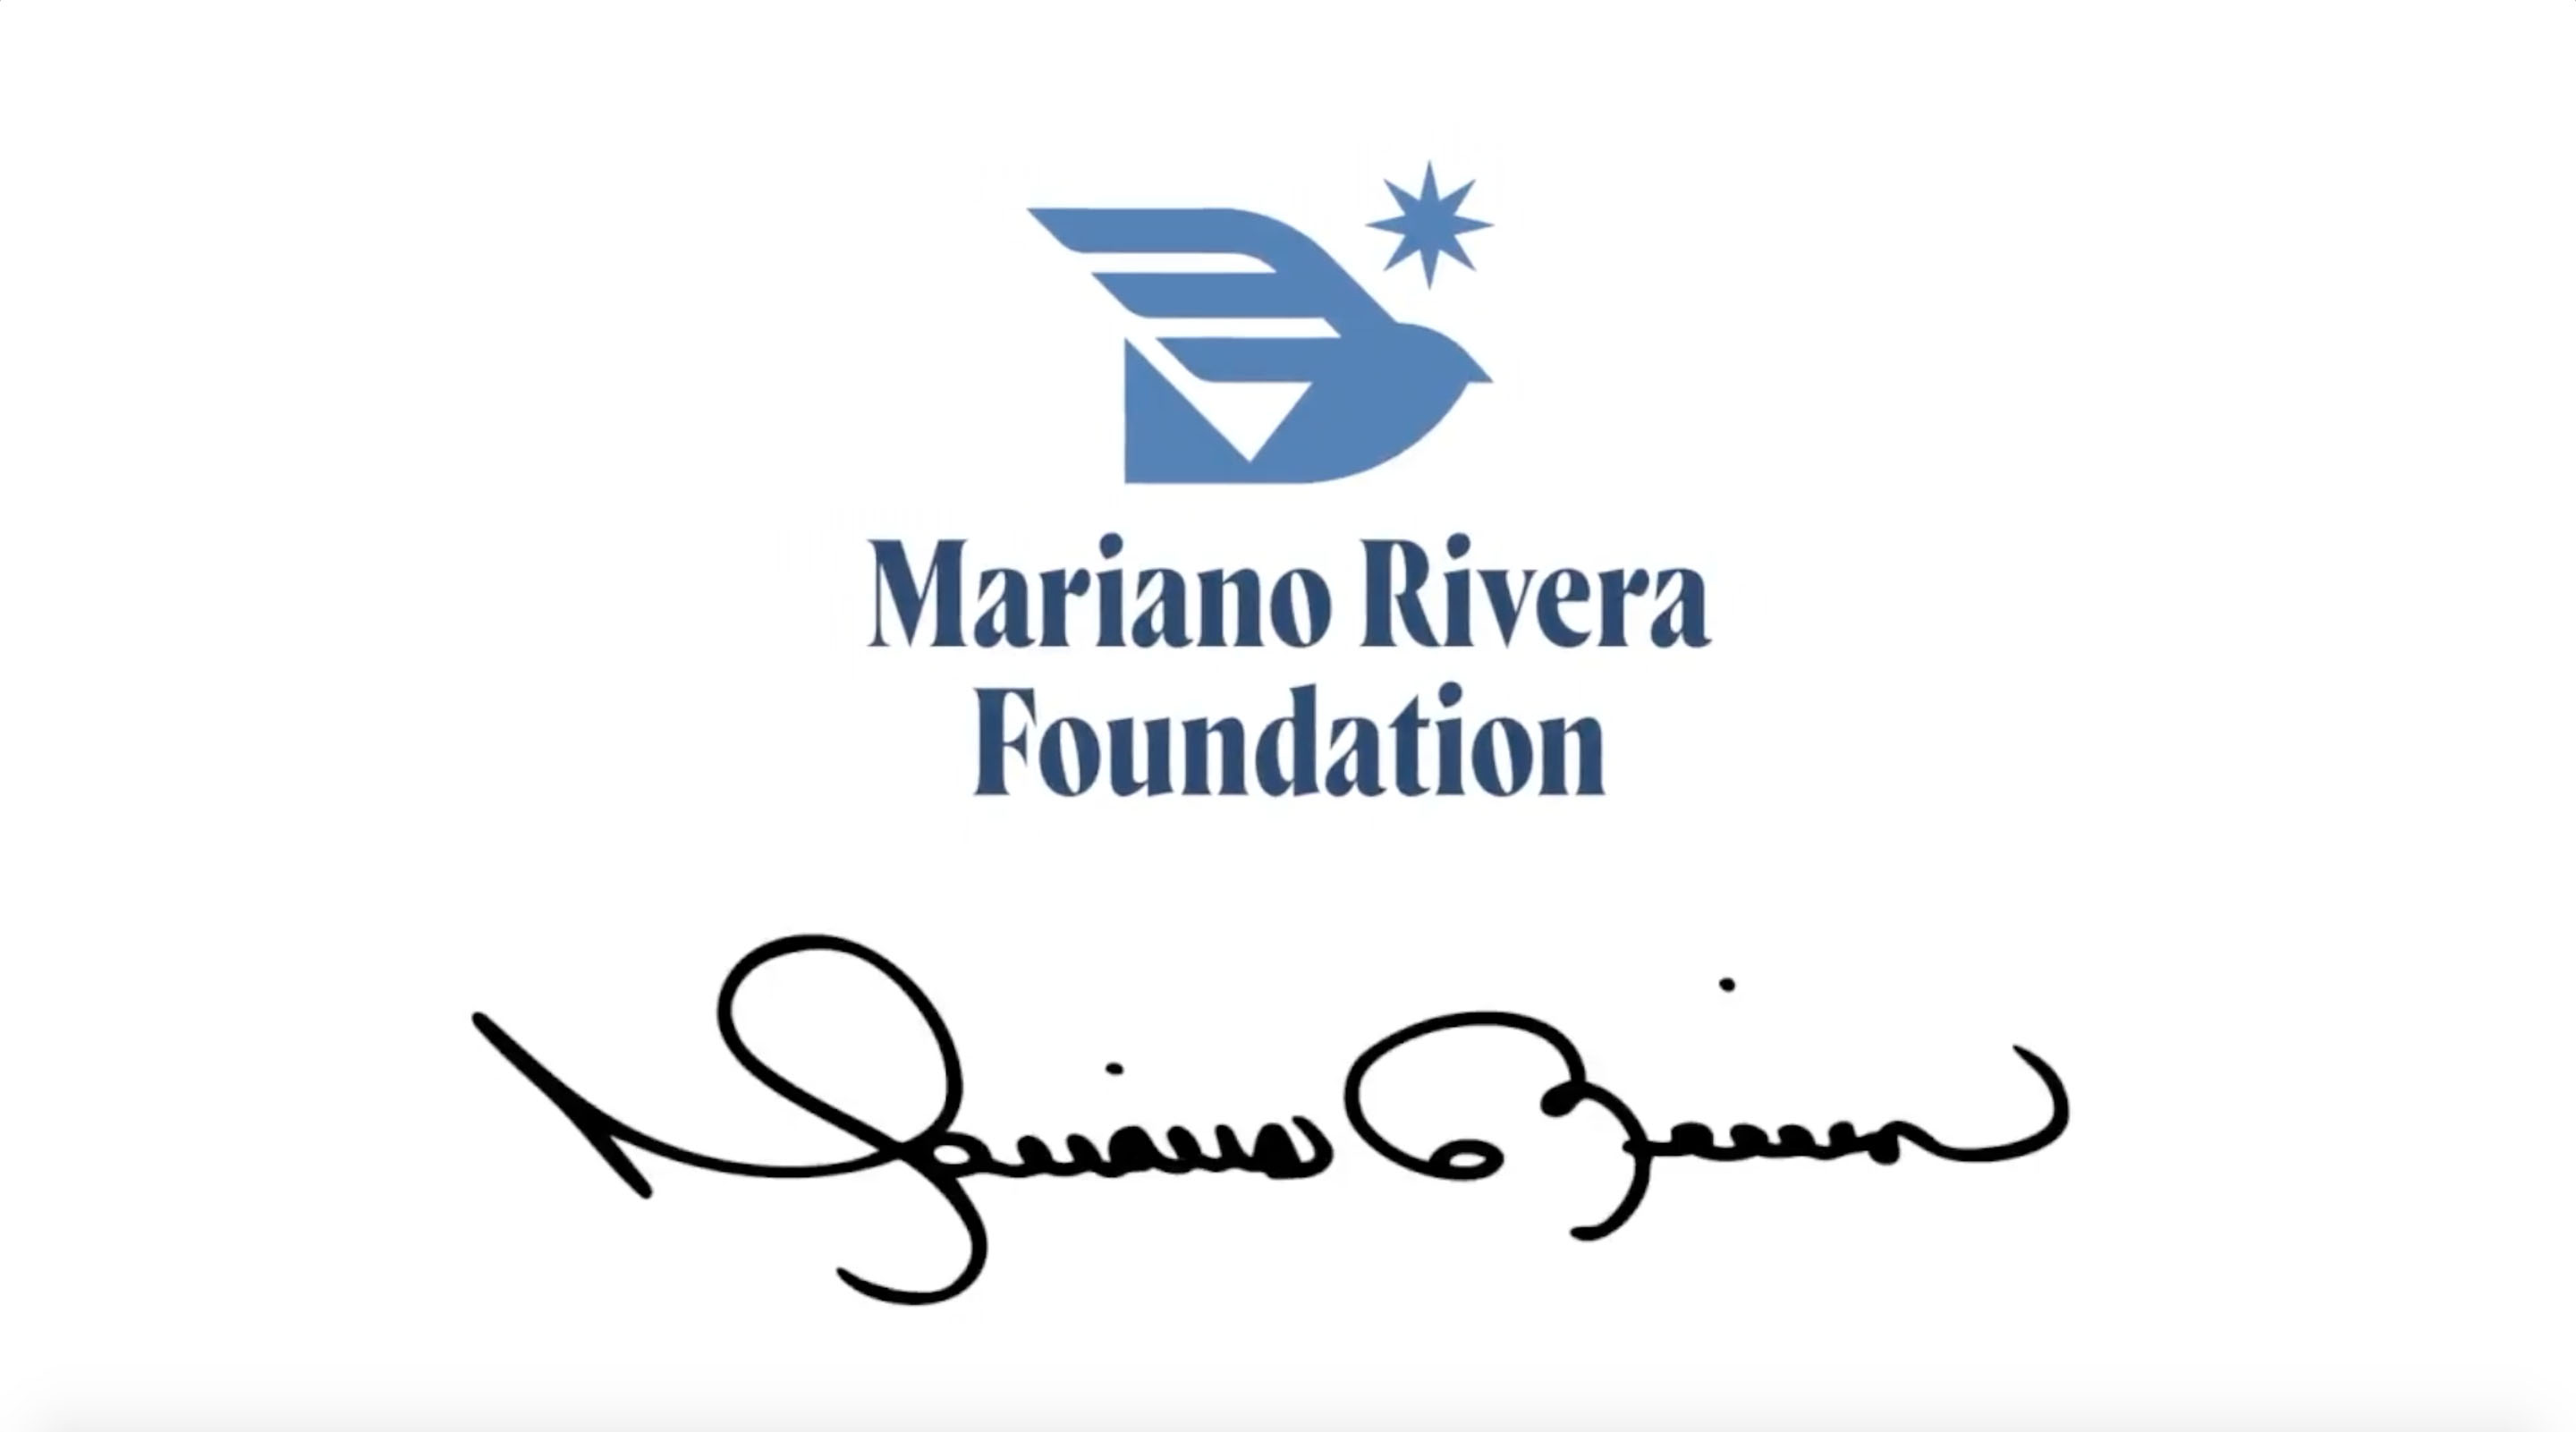 Mariano Rivera is from Panama, yet his foundation is based in Stanton